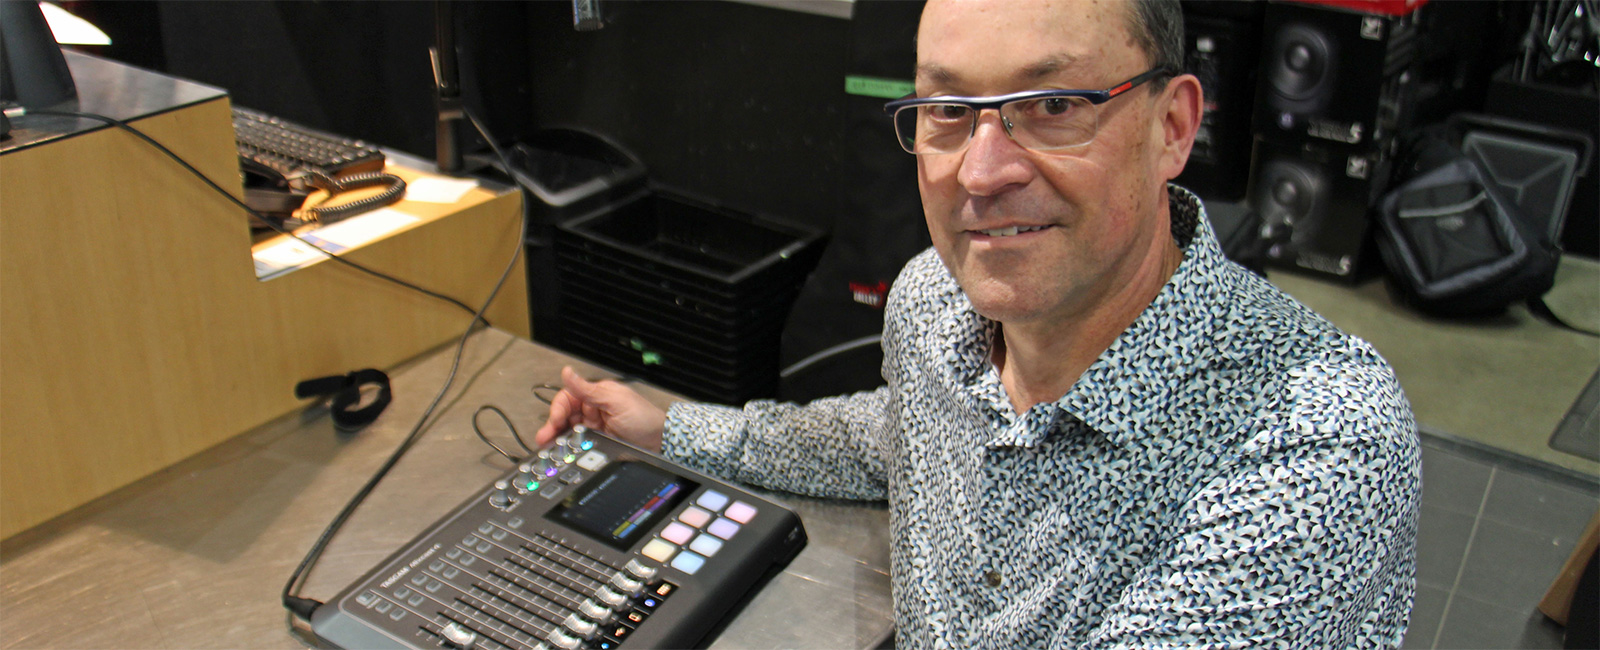 TASCAM's Mixcast 4 Podcast Station  Helps Howard Olsen Educate and Inspire